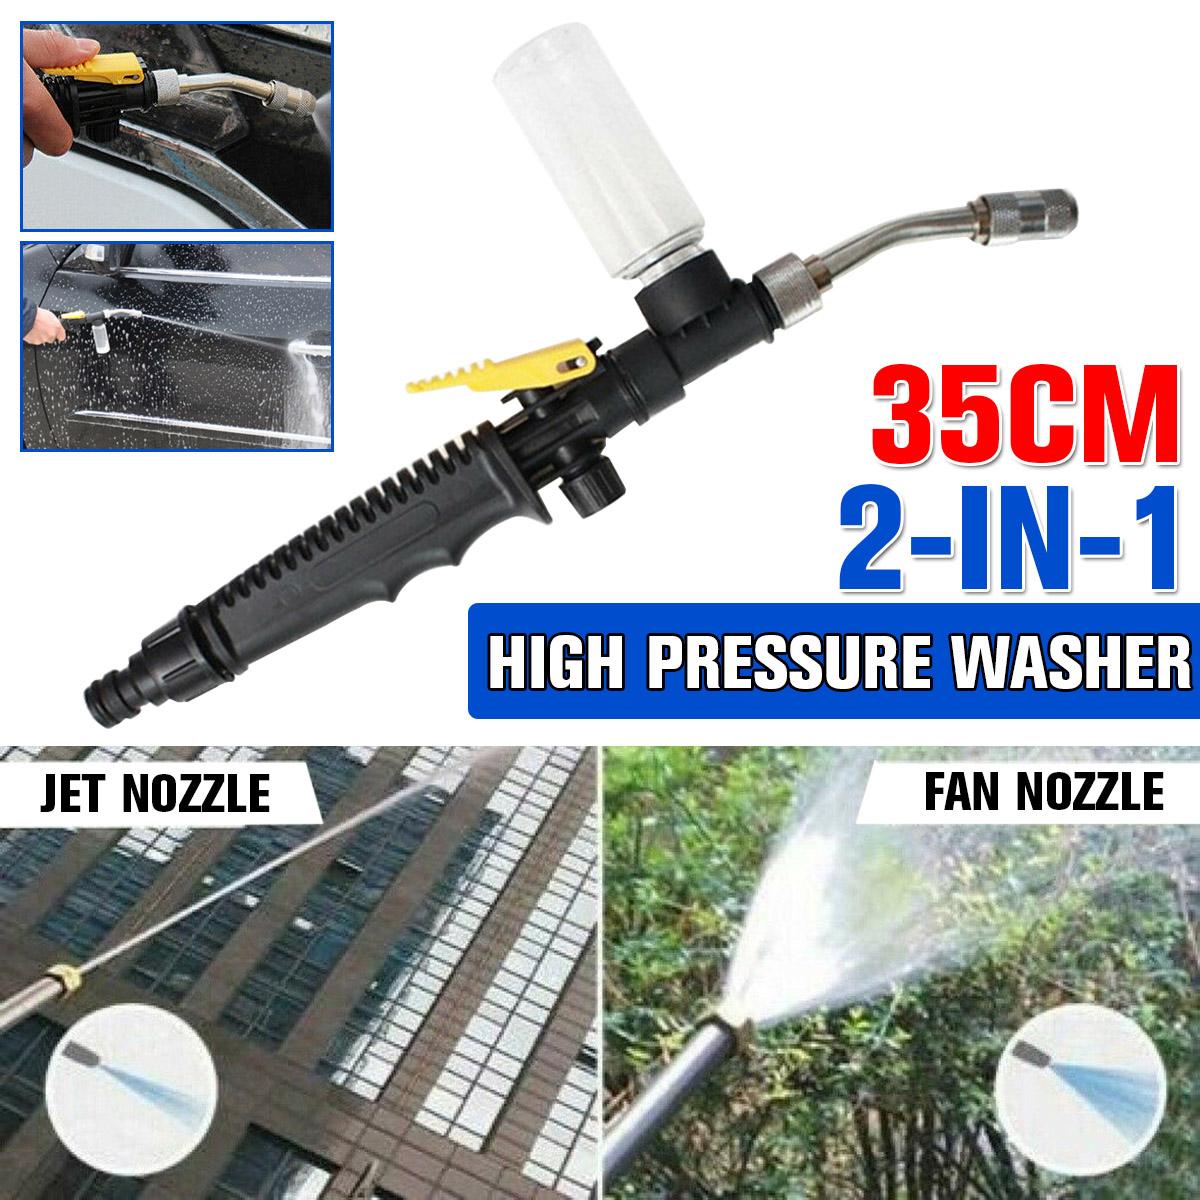 35CM 2-in-1 High Pressure Power Washer Home Garden Cleaning Tool Sprayer Replace 